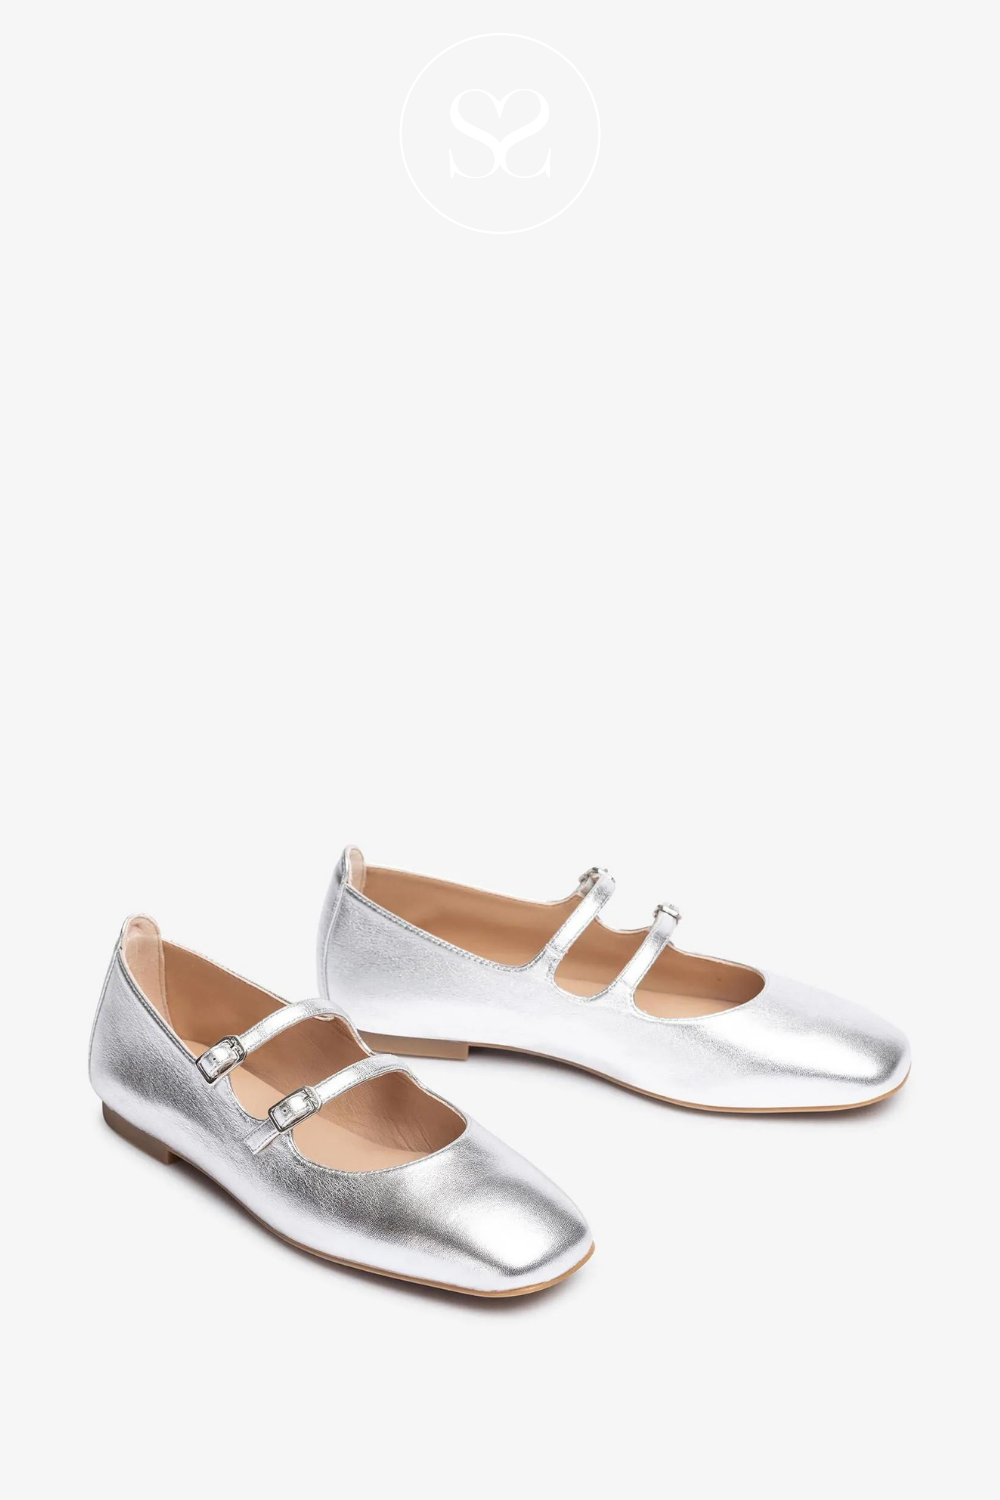 UNISA BERLEY SILVER LEATHER DOUBLE STRAPPED PUMPS